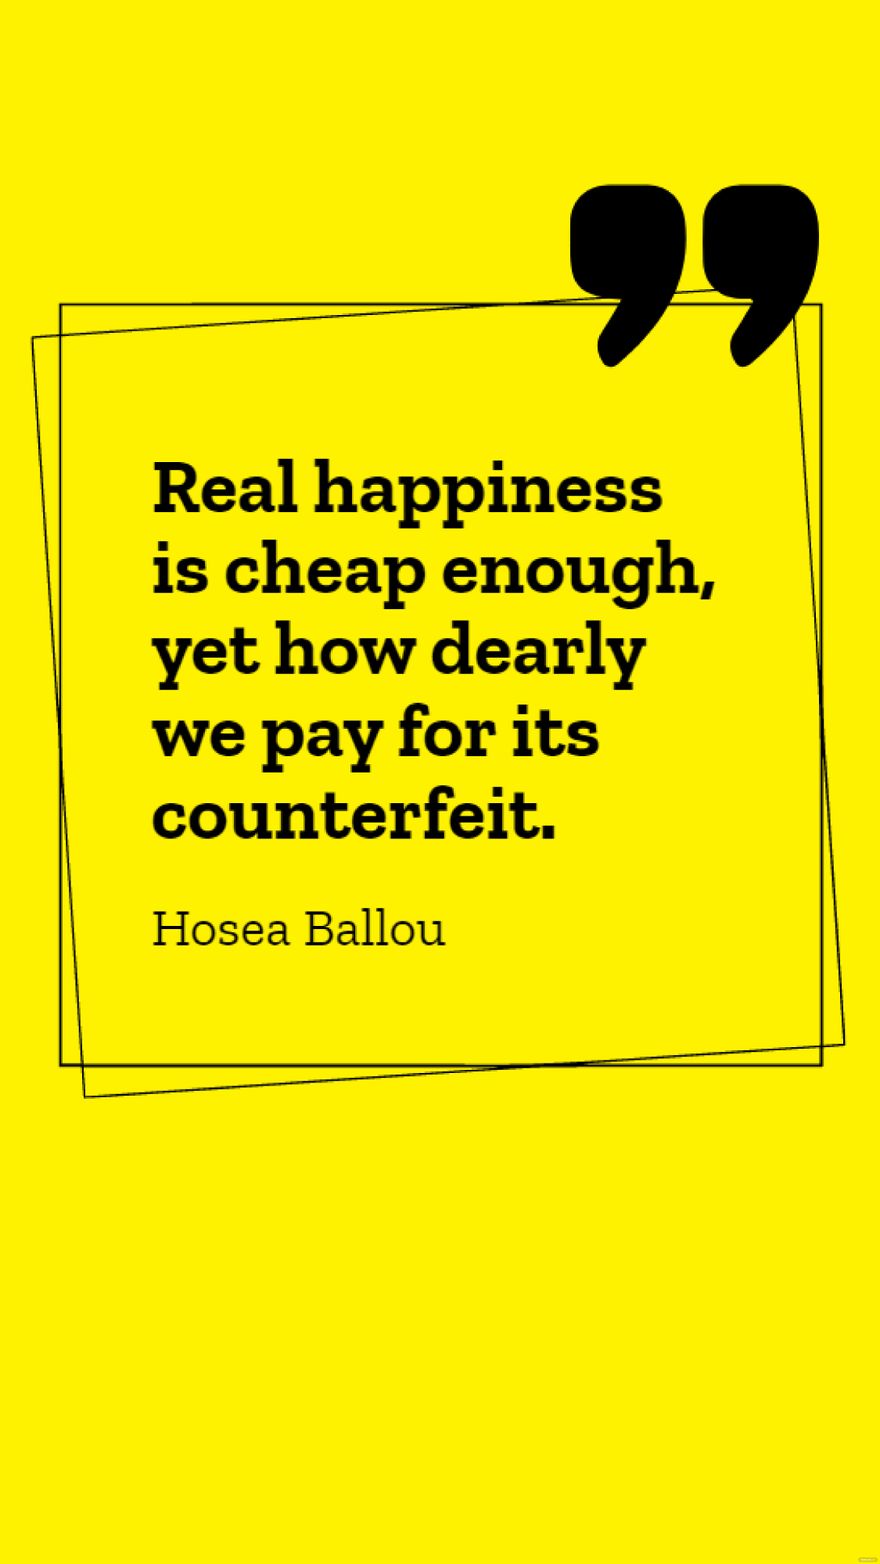 Free Hosea Ballou - Real happiness is cheap enough, yet how dearly we pay for its counterfeit. in JPG